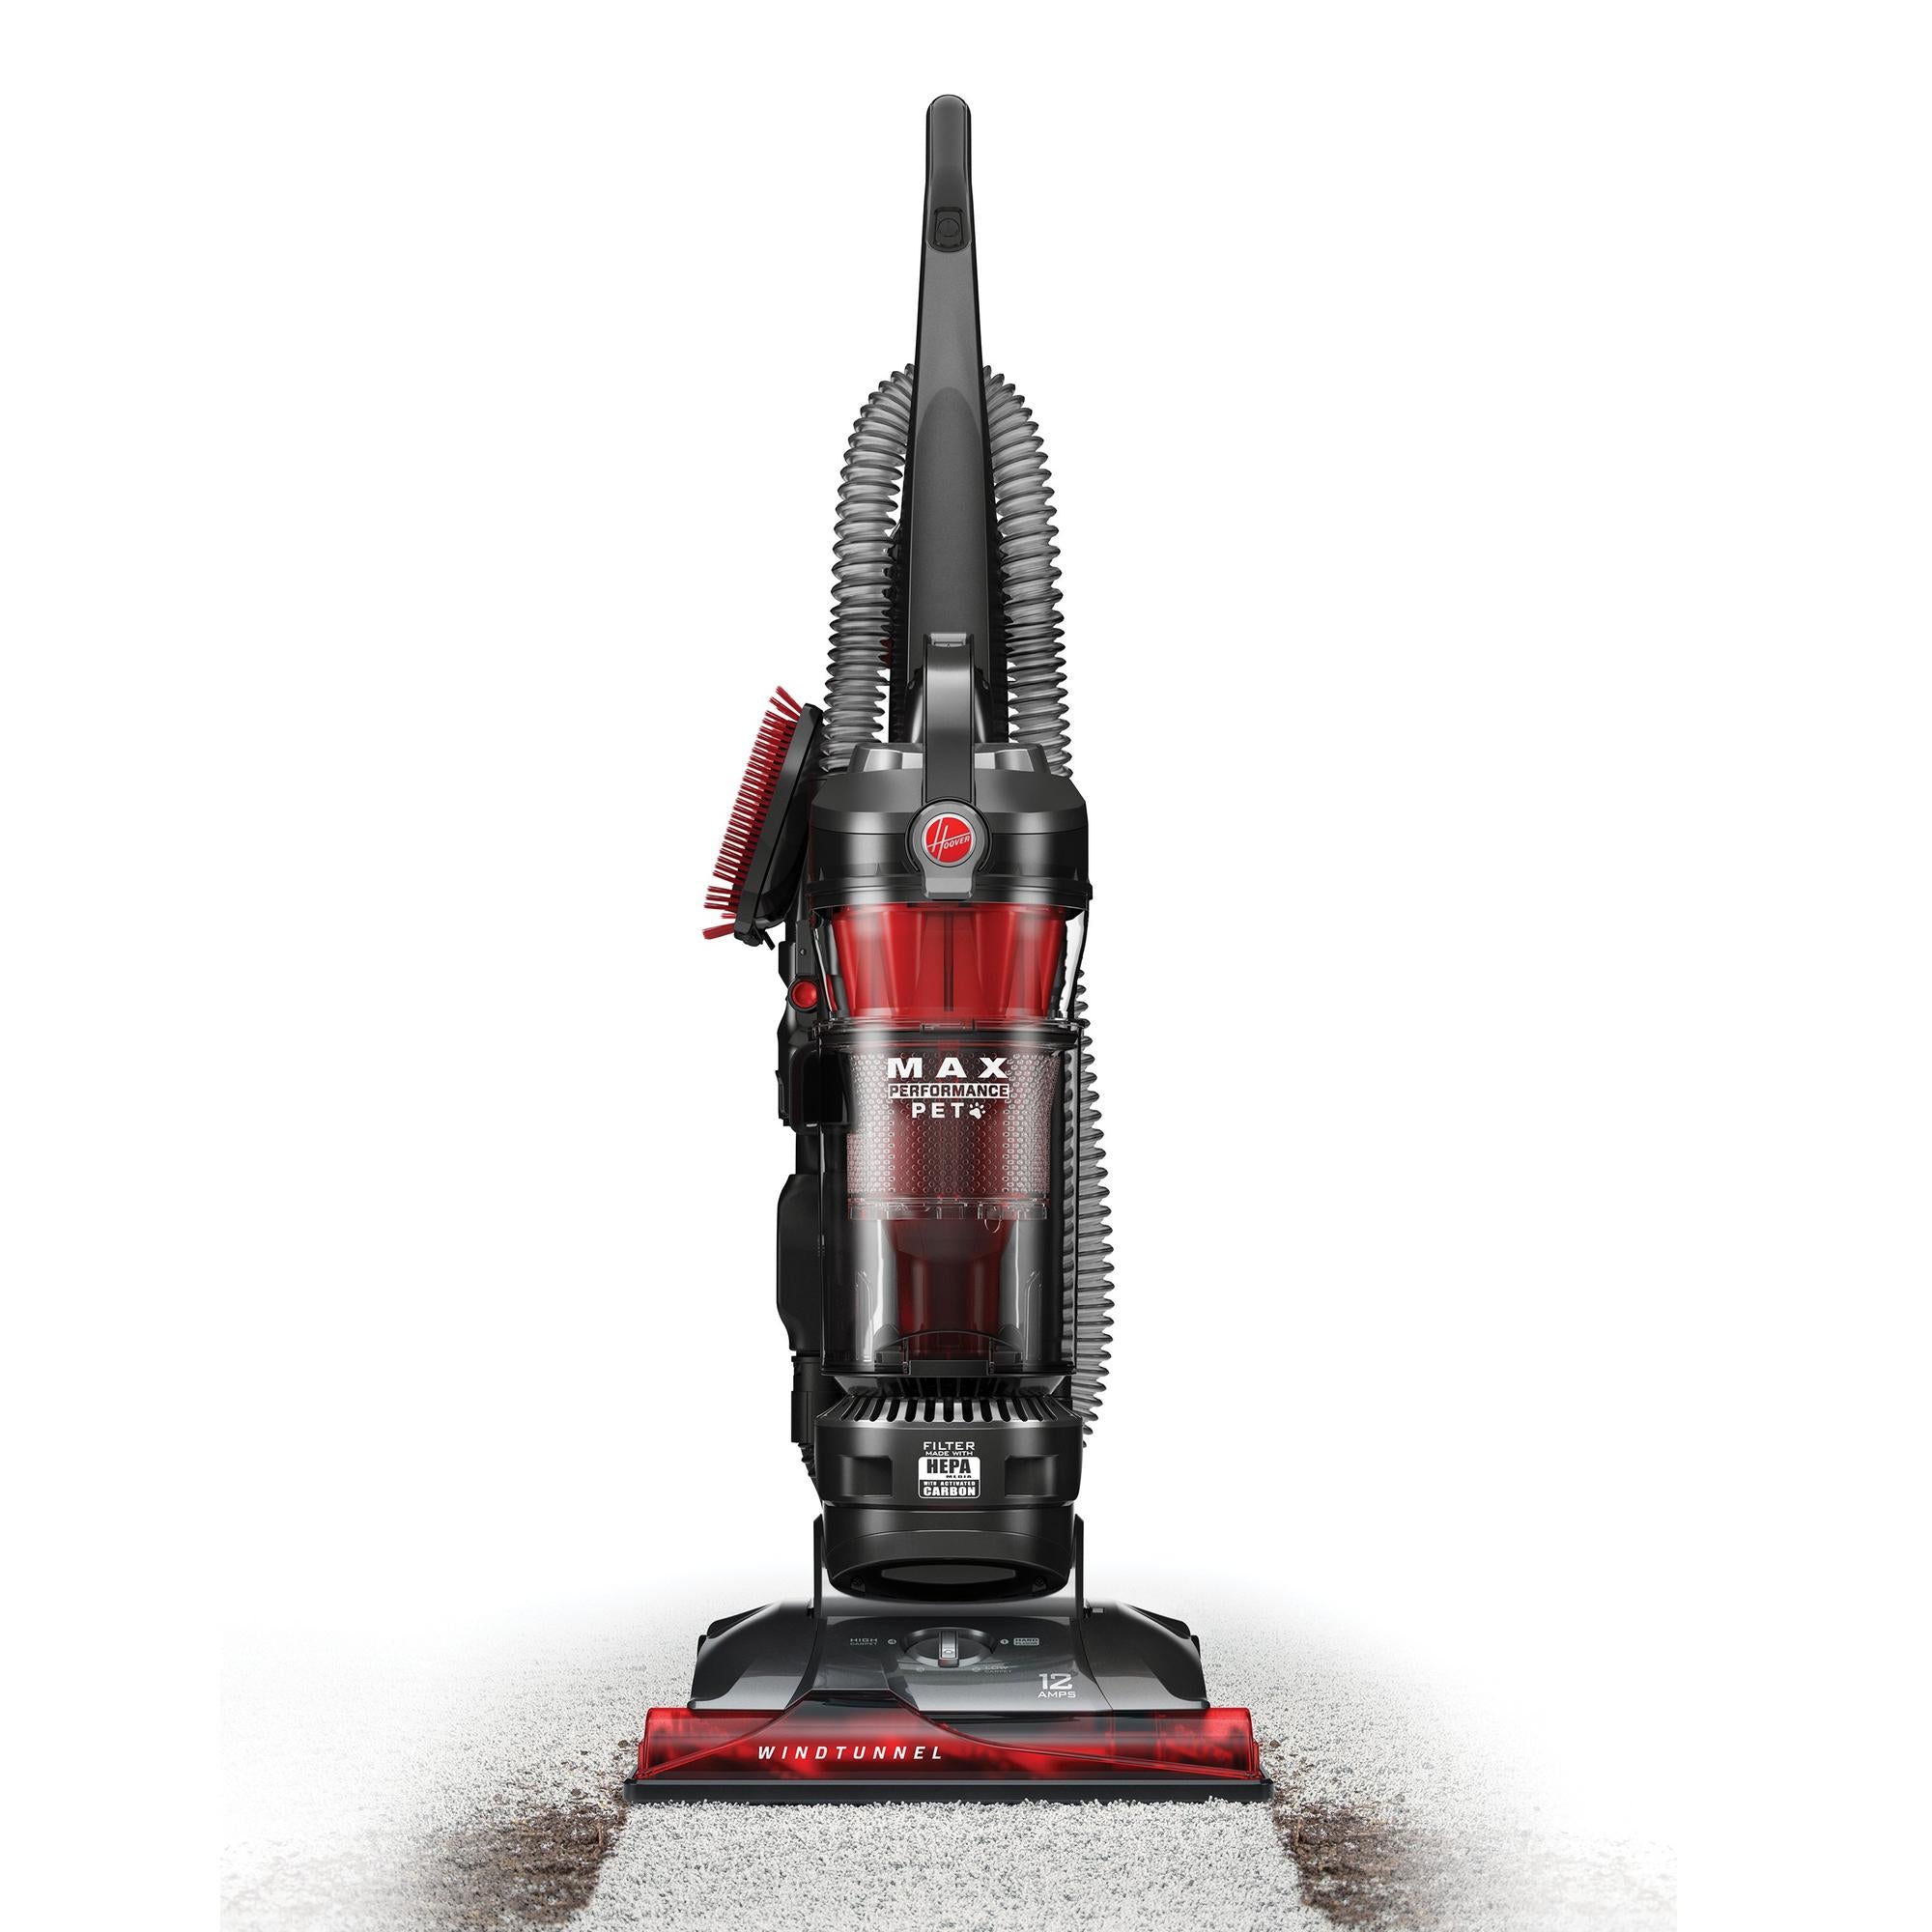 WindTunnel 3 Max Performance Pet Bagless Upright Vacuum Cleaner – Hoover